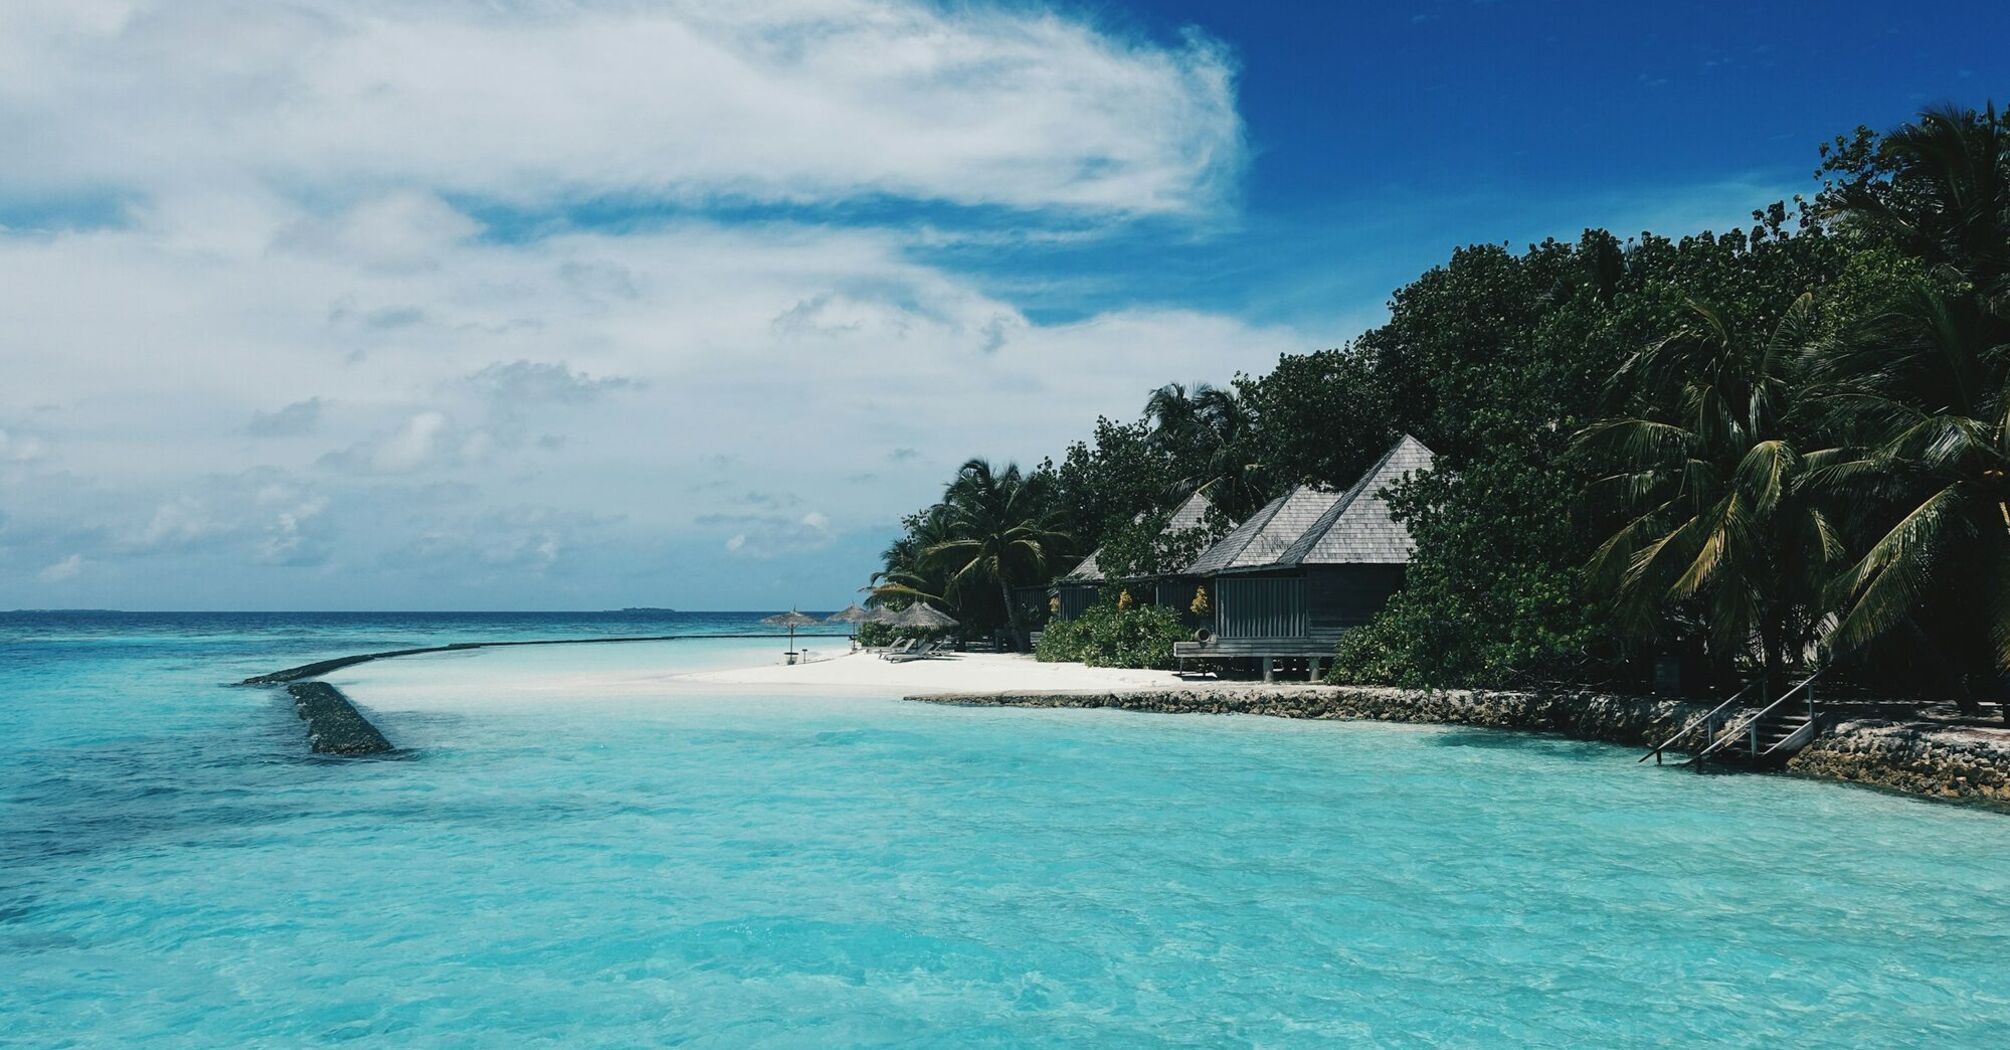 Beautiful beach in the Maldives with clear blue water and tropical huts